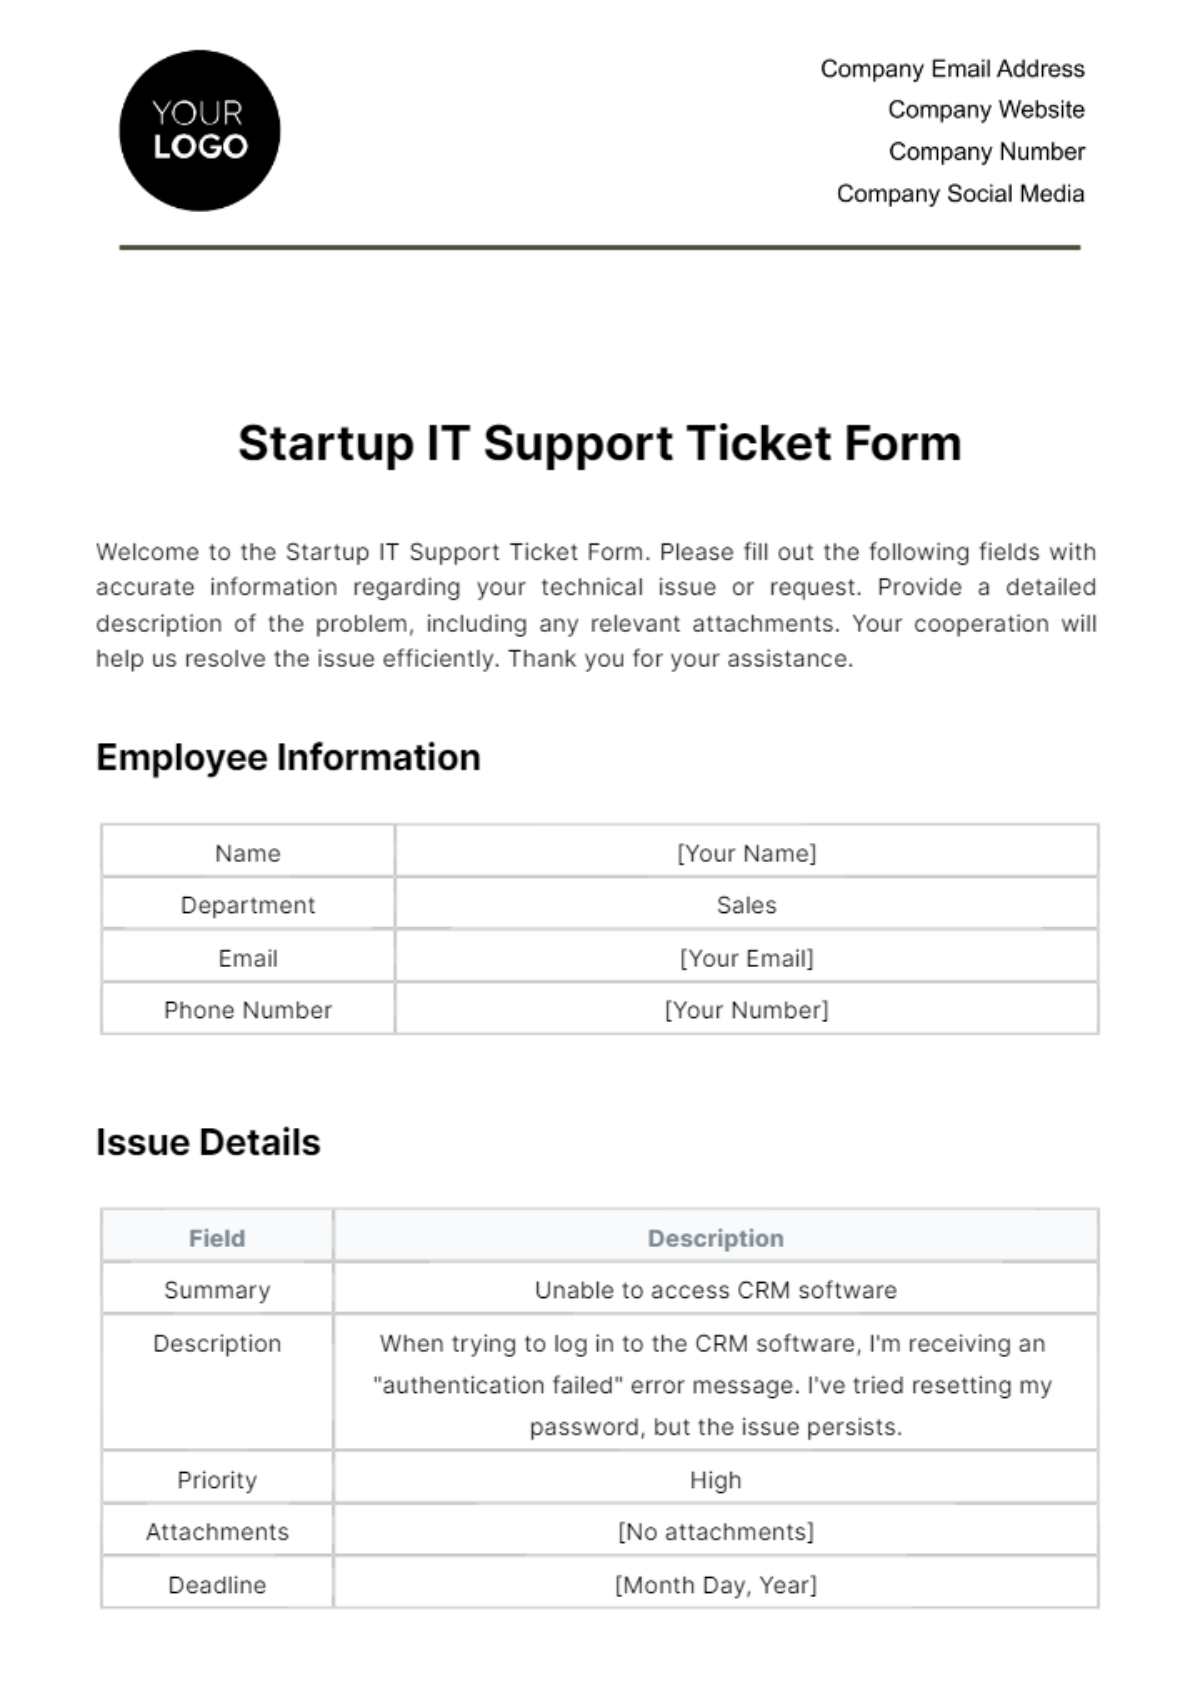 Free Startup IT Support Ticket Form Template